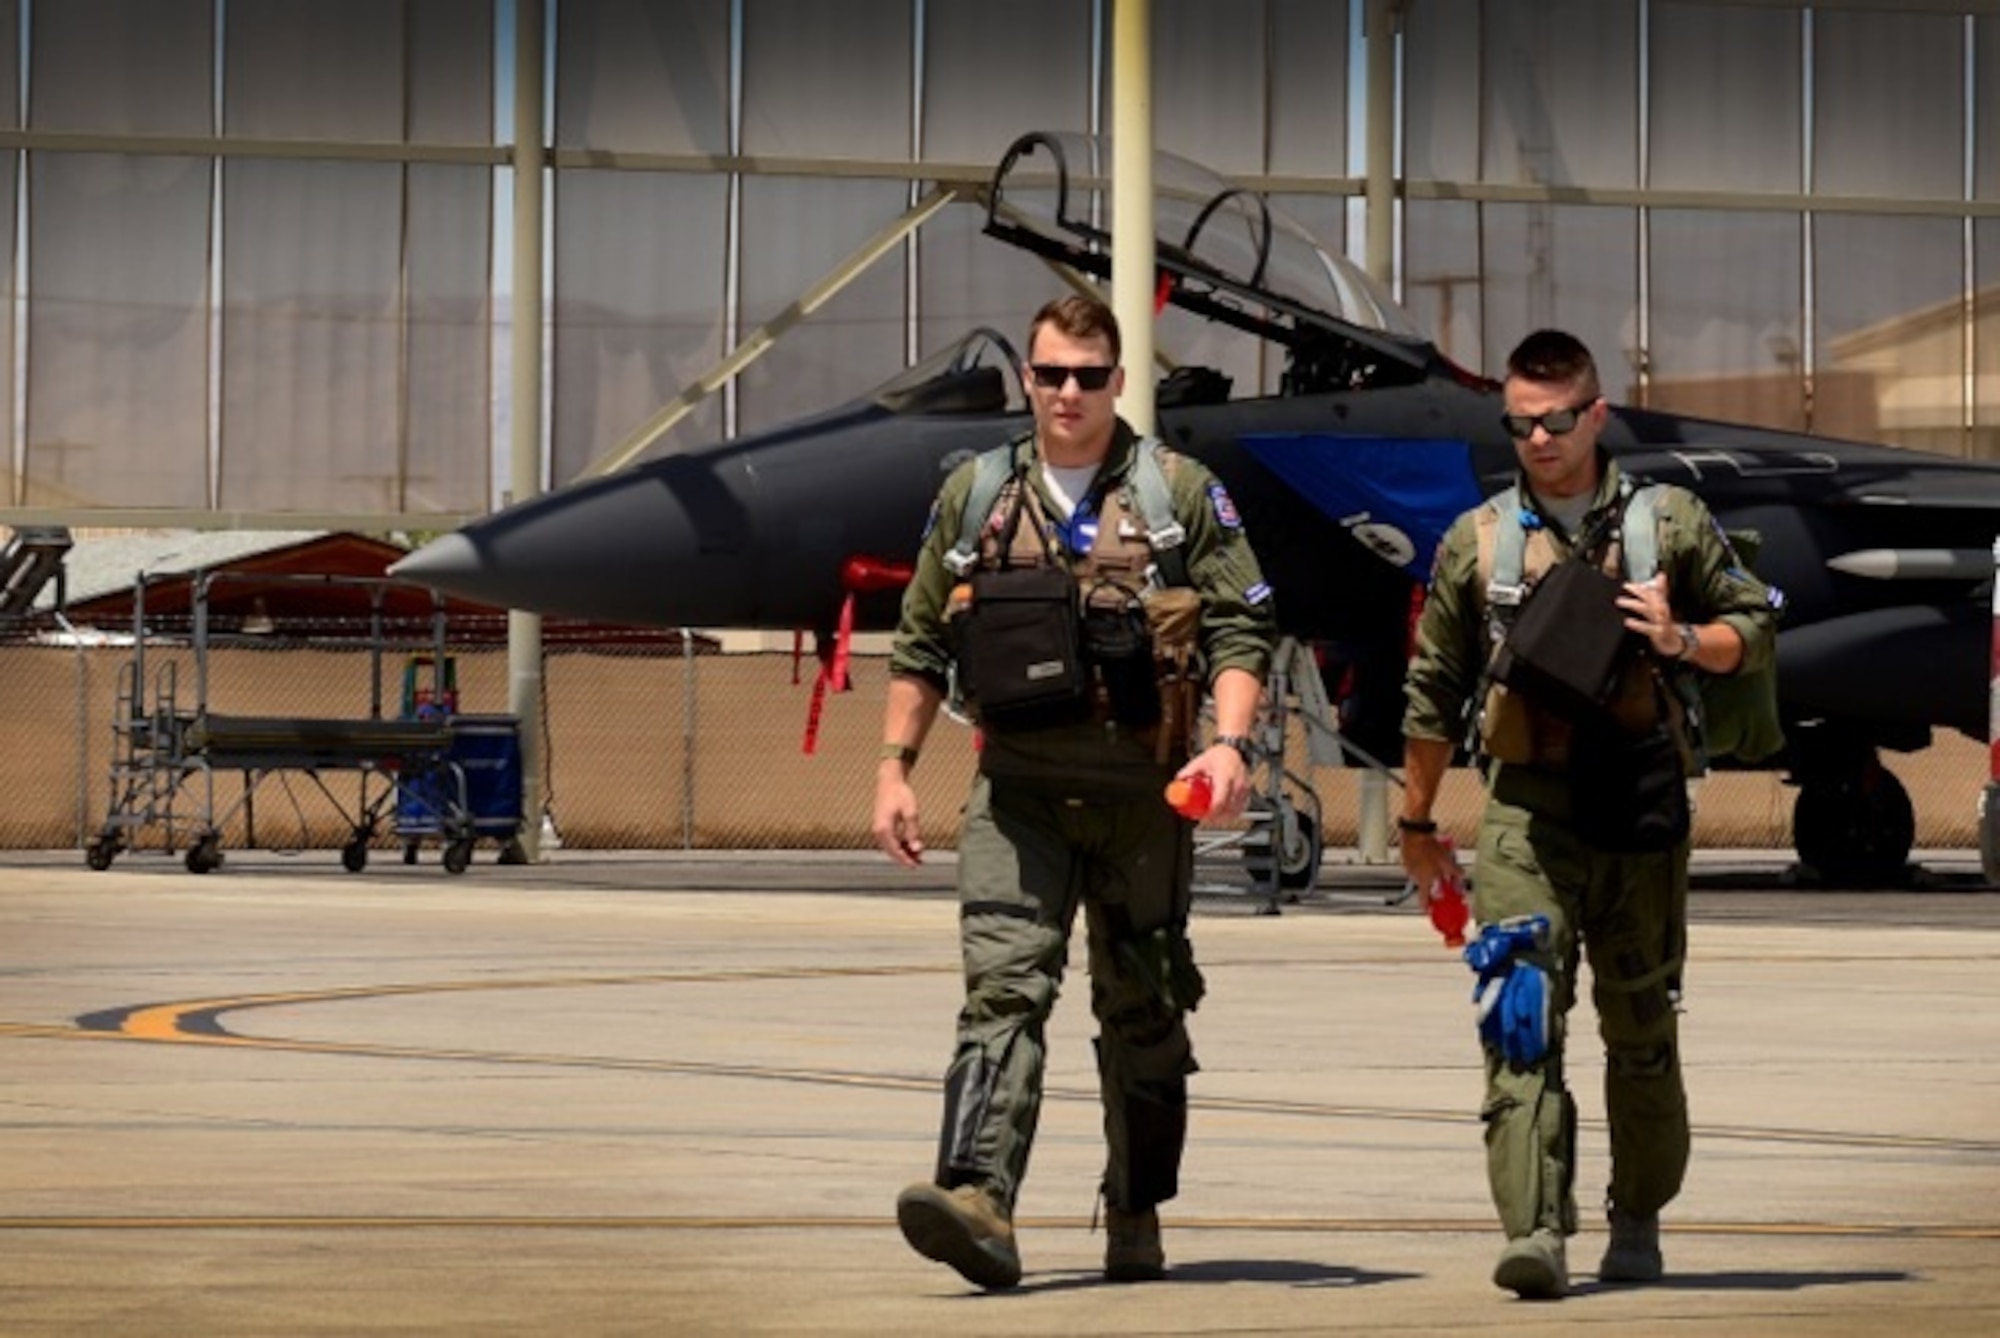 U.S. Air Force 1st Lieutenant Drew Lyons, 492nd Fighter Squadron, F-15E Strike Eagle pilot, and 1st Lieutenant J. Paul Reasner, 492nd FS, F-15E Strike Eagle weapon systems officer, step to their aircraft for a sortie in support of exercise Red Flag 16-4 at Nellis Air Force Base, Nev. Aug 17. Red Flag is the U.S. Air Force’s premier air-to-air combat training exercise and one of a series of advanced training programs that is administered by the U.S. Air Force Warfare Center and executed through the 414th Combat Training Squadron. (U.S. Air Force photo/ Tech. Sgt. Matthew Plew)